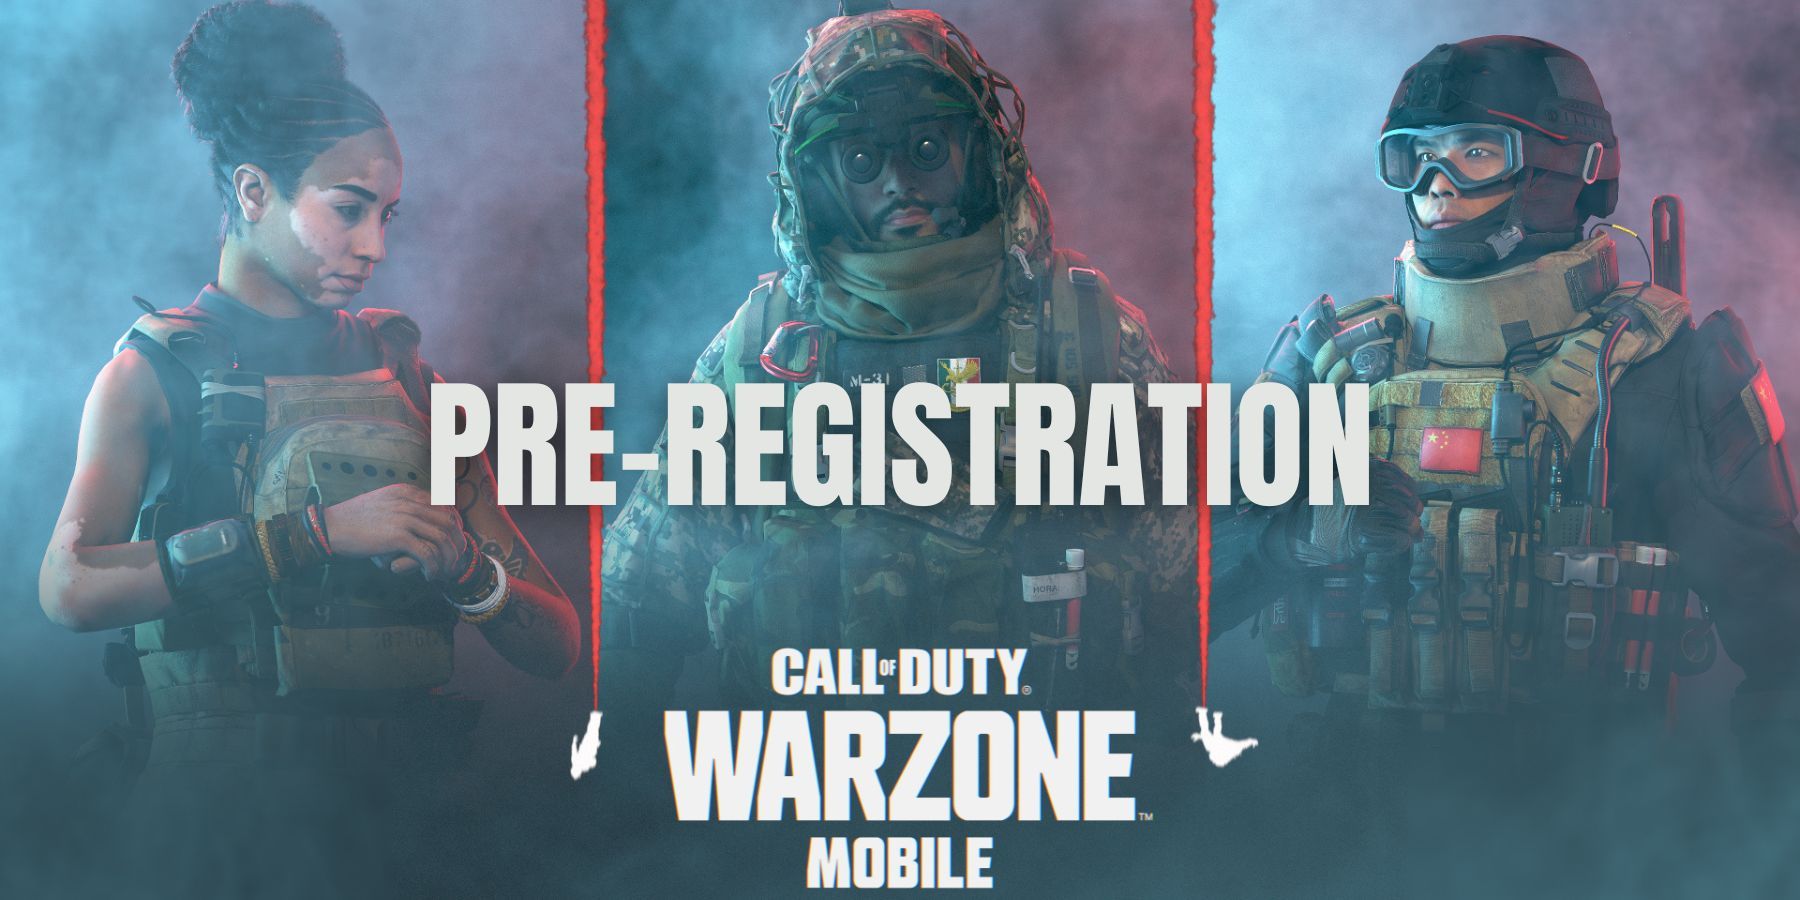 WARZONE MOBILE IS HERE! HOW TO DOWNLOAD + PLAY! [FULL TUTORIAL